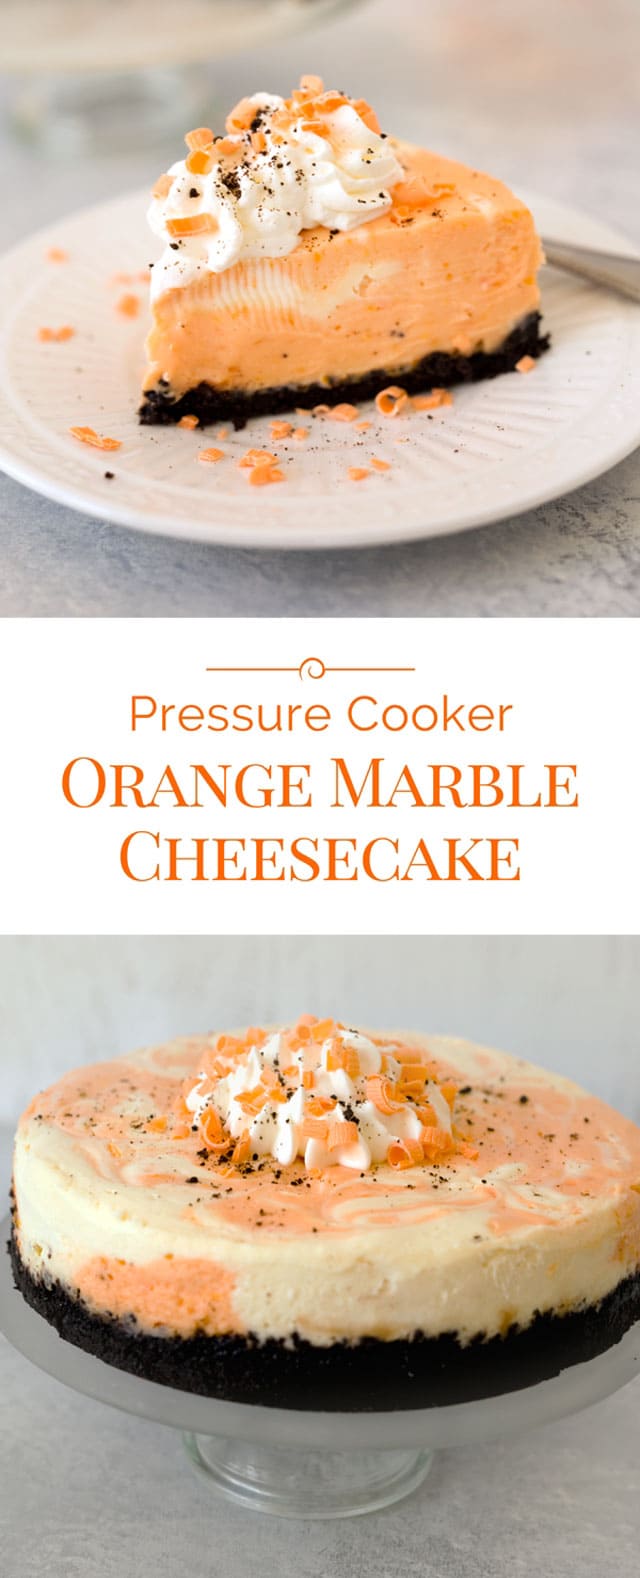 Orange-Swirl-Cheesecake-Collage-Pressure-Cooking-Today